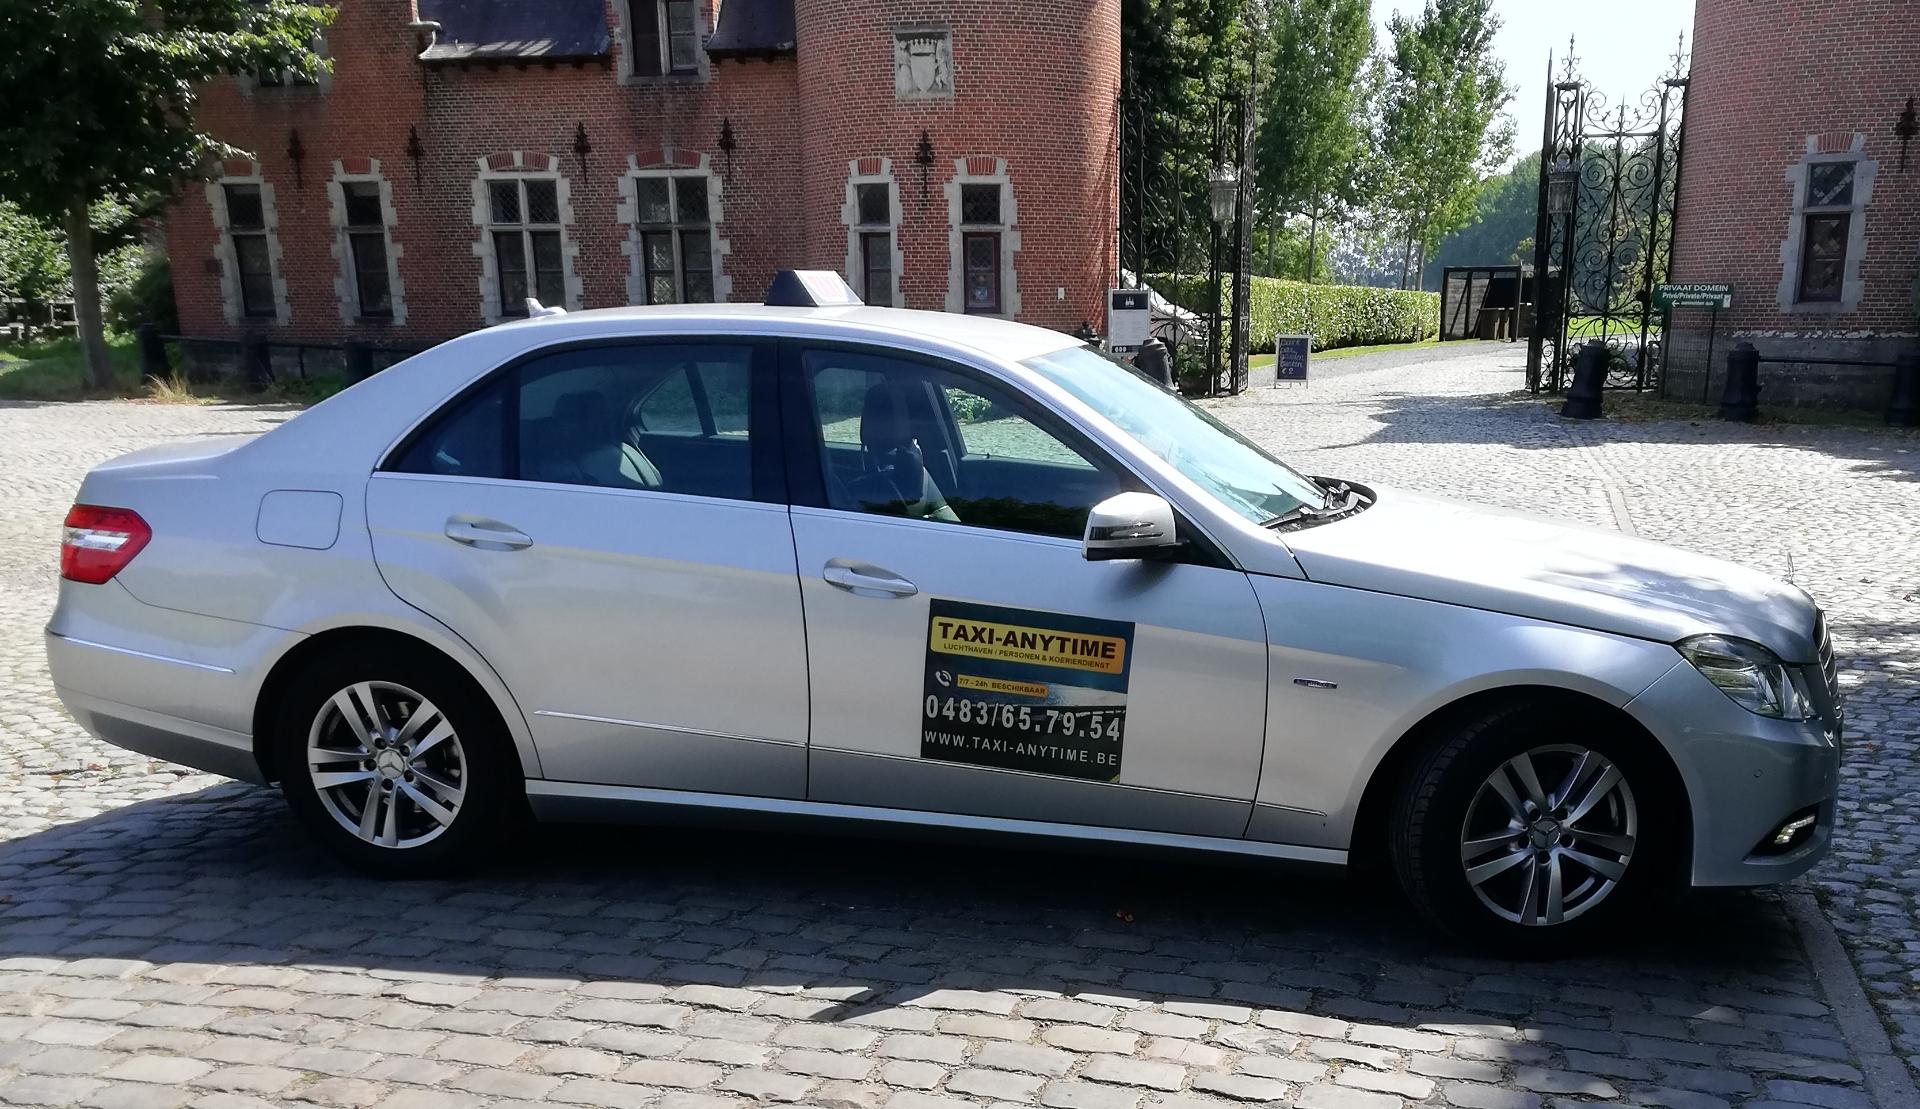 taxibedrijven Sint-Lambrechts-Woluwe Taxi-Anytime